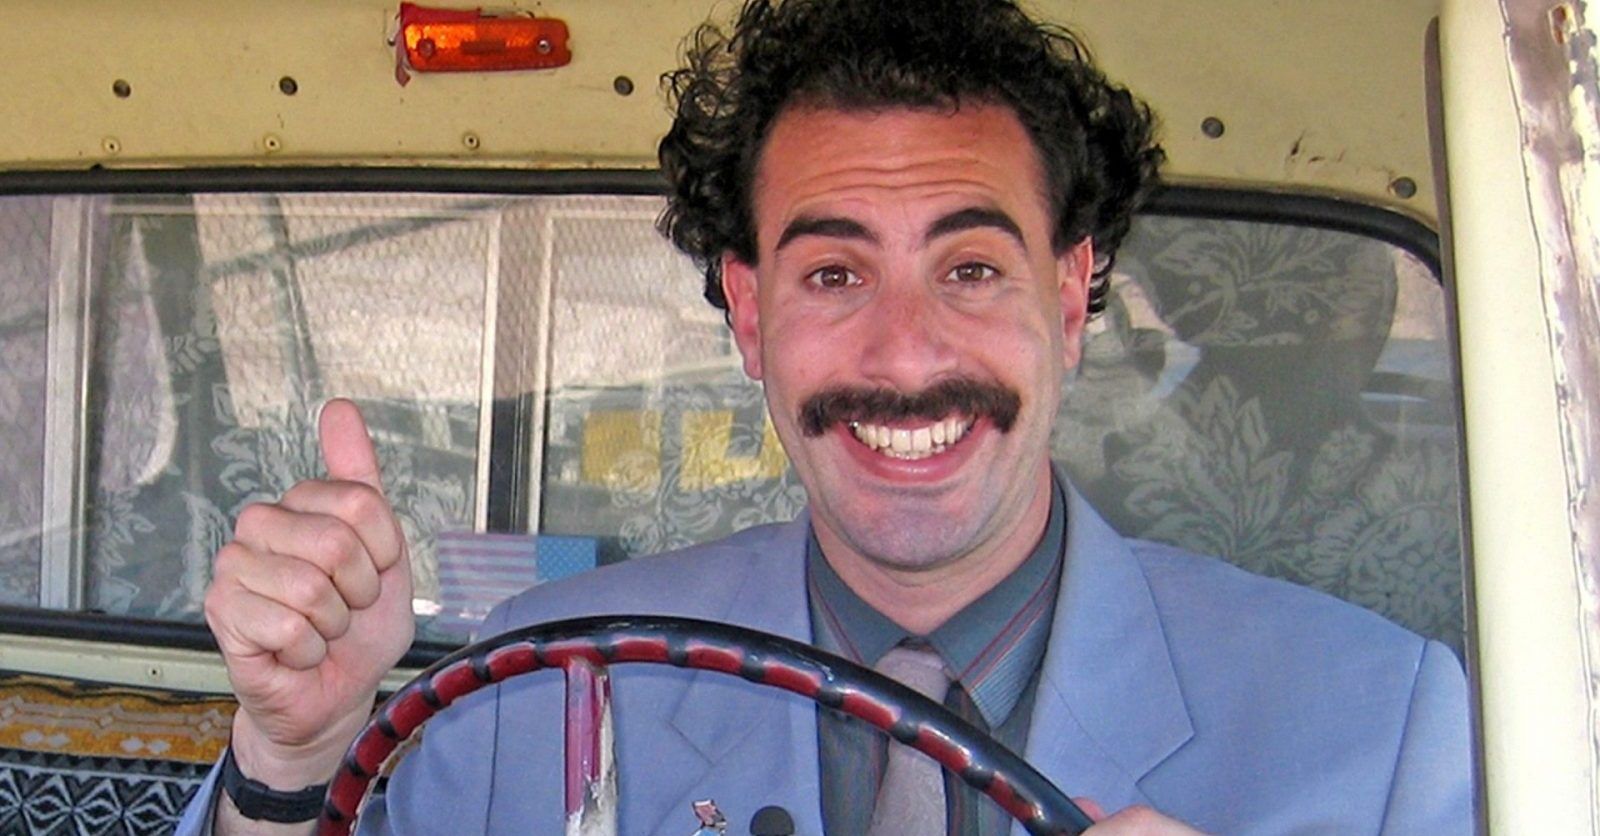 borat behind the wheel of a bus giving a thumbs up